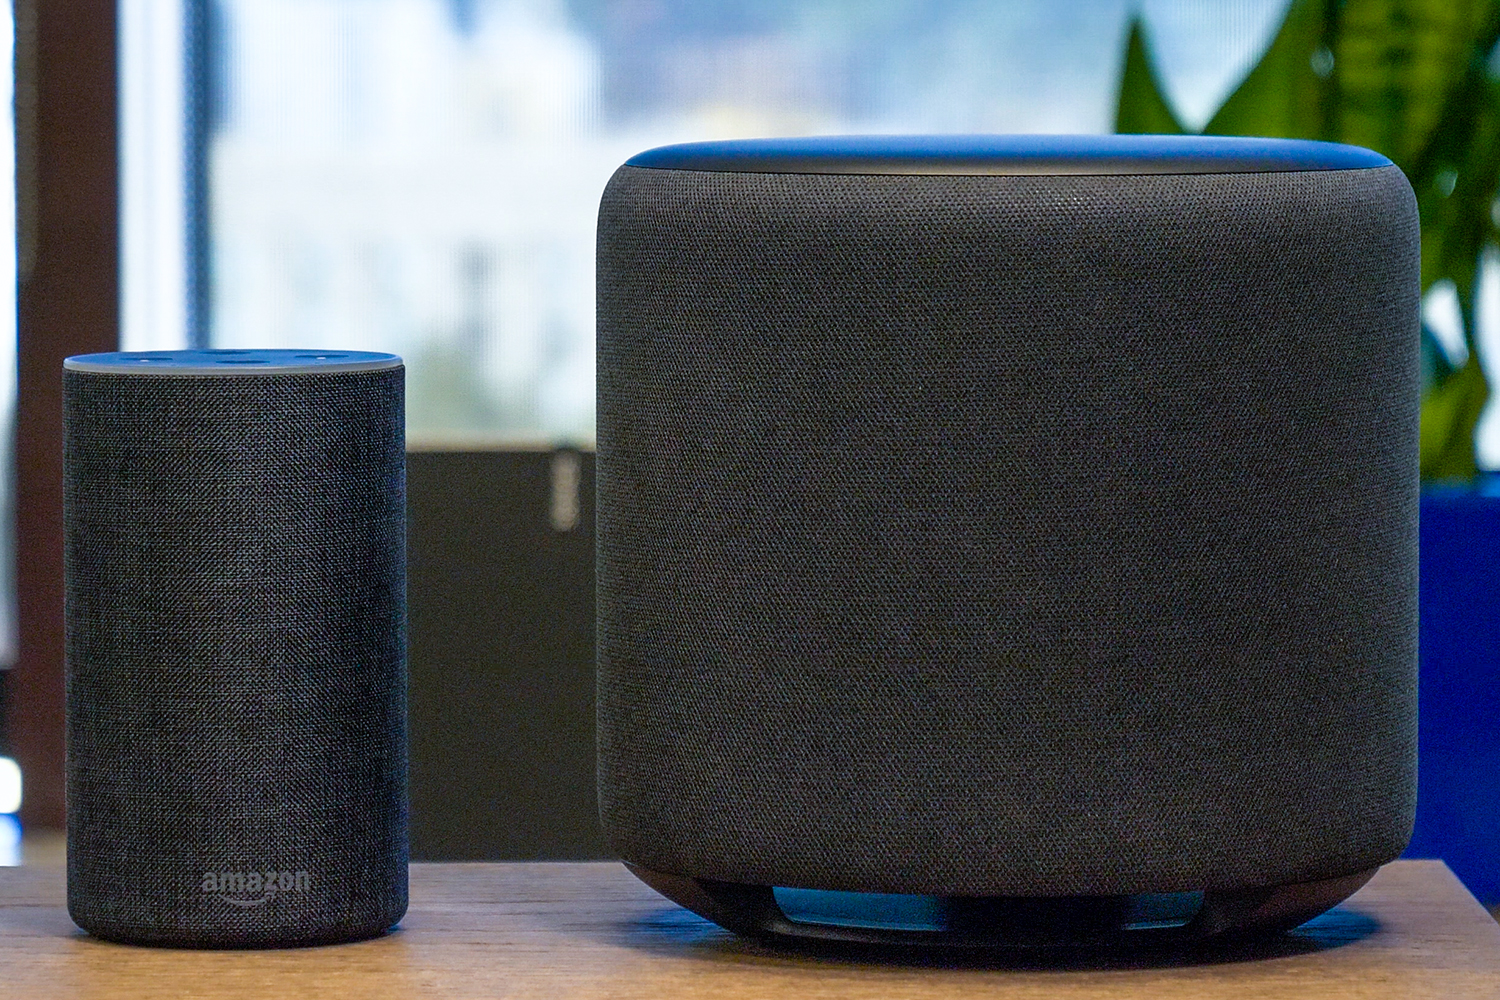 Review: The tiny $129 Echo Sub is a huge audio upgrade